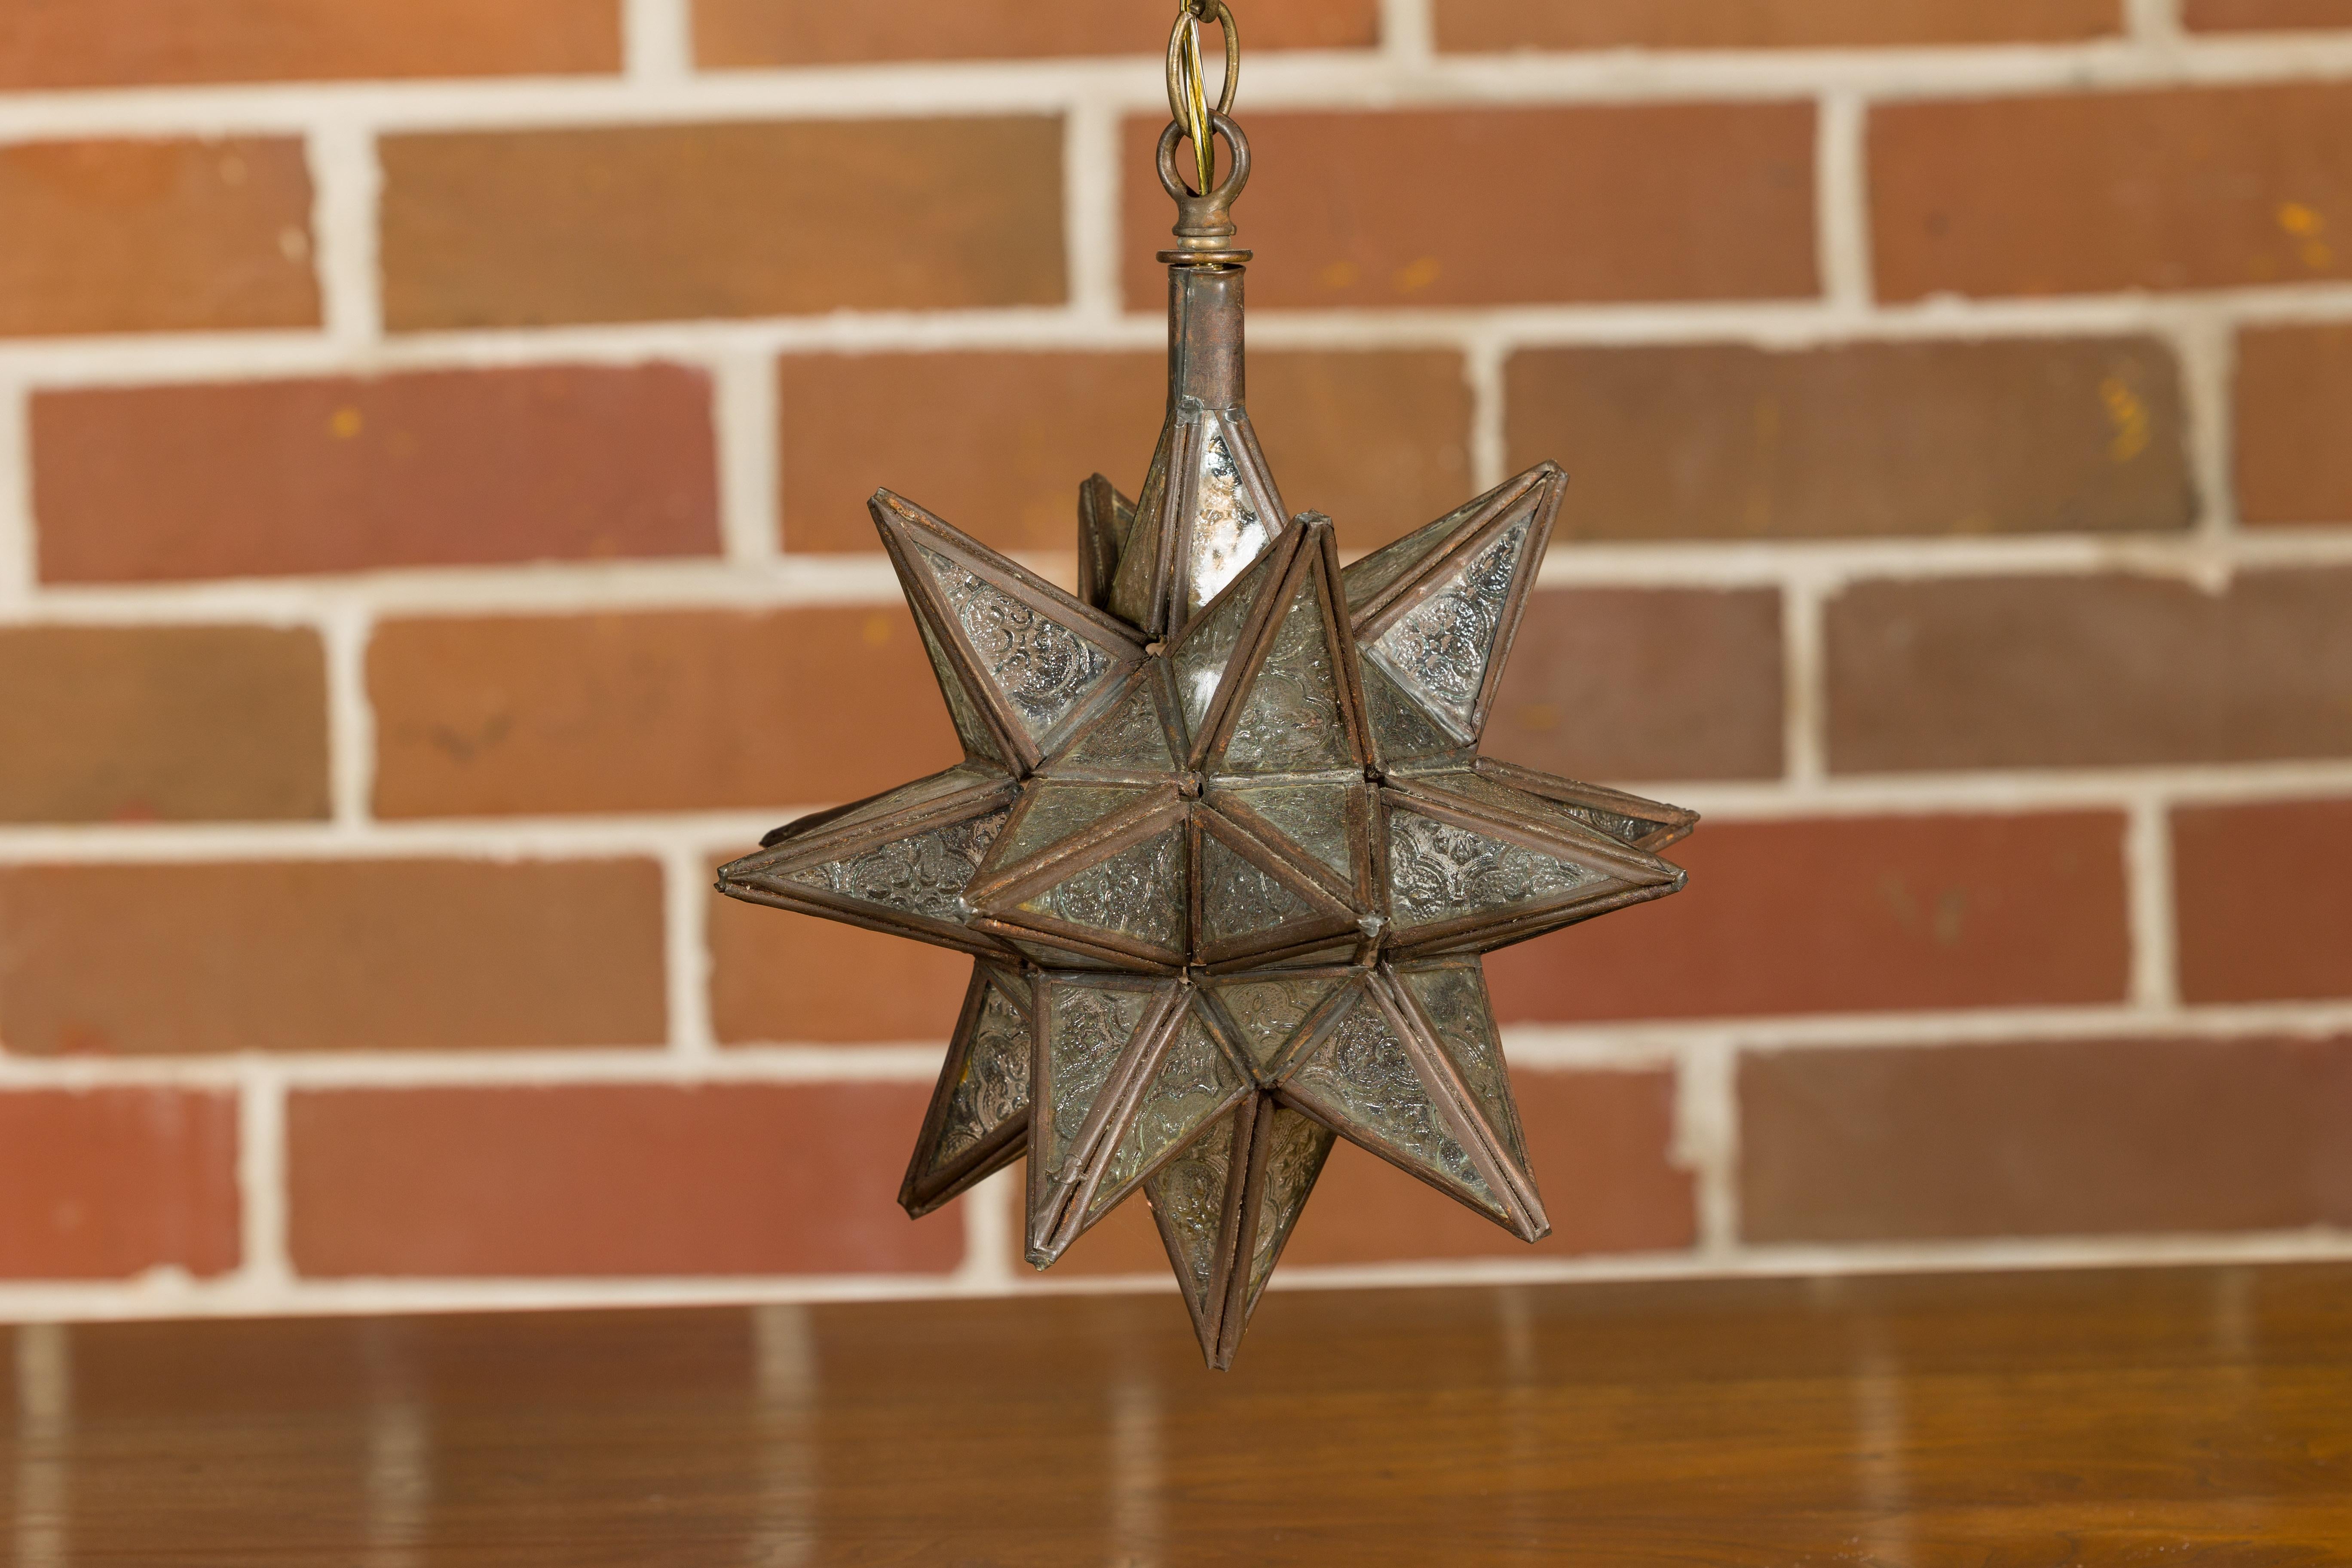 Mid-Century Modern Midcentury French Star Light Fixture with Textured Glass and Single Socket For Sale